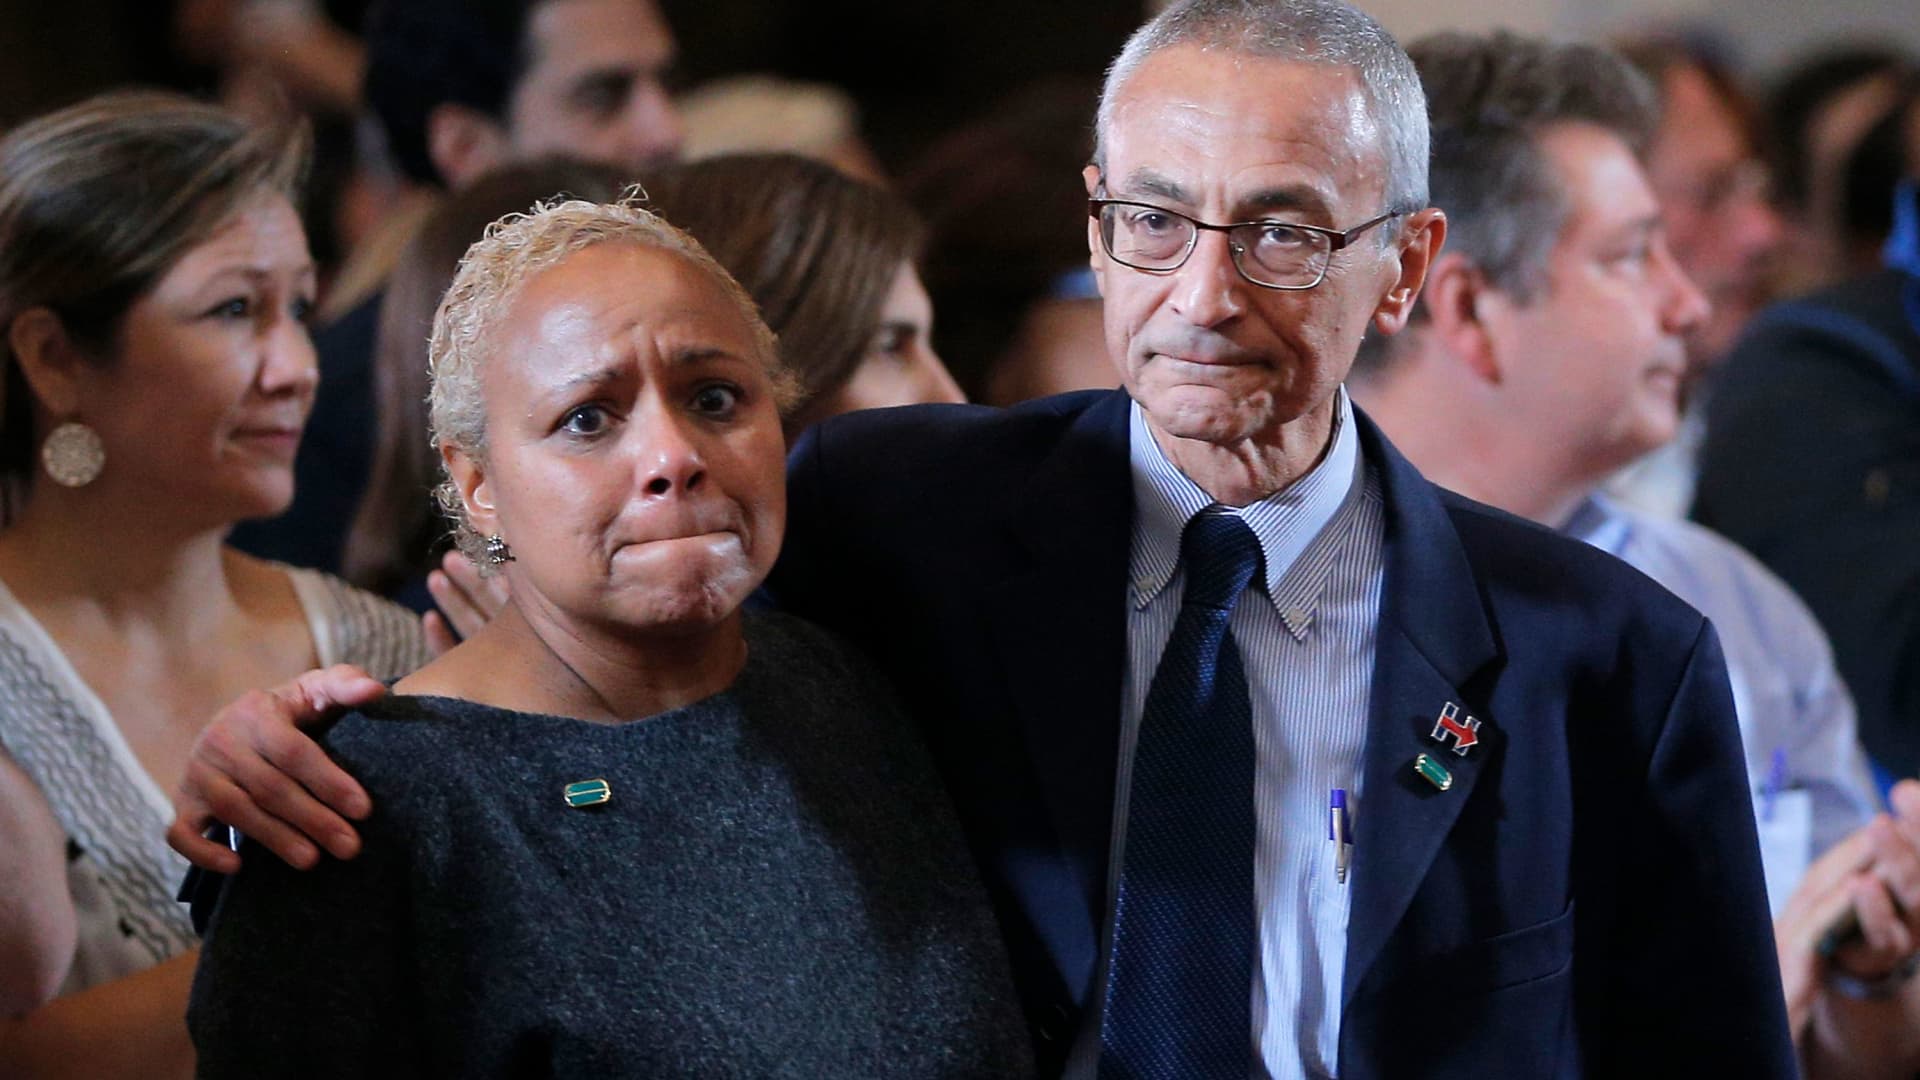 Campaign Chairman John Podesta hugs Tina Flournoy, chief of staff to former U.S. President Bill Clinton, as they attend an event being held by Hillary Clinton to address her staff and supporters about the results of the U.S. election at a hotel in the Manhattan borough of New York, November 9, 2016.